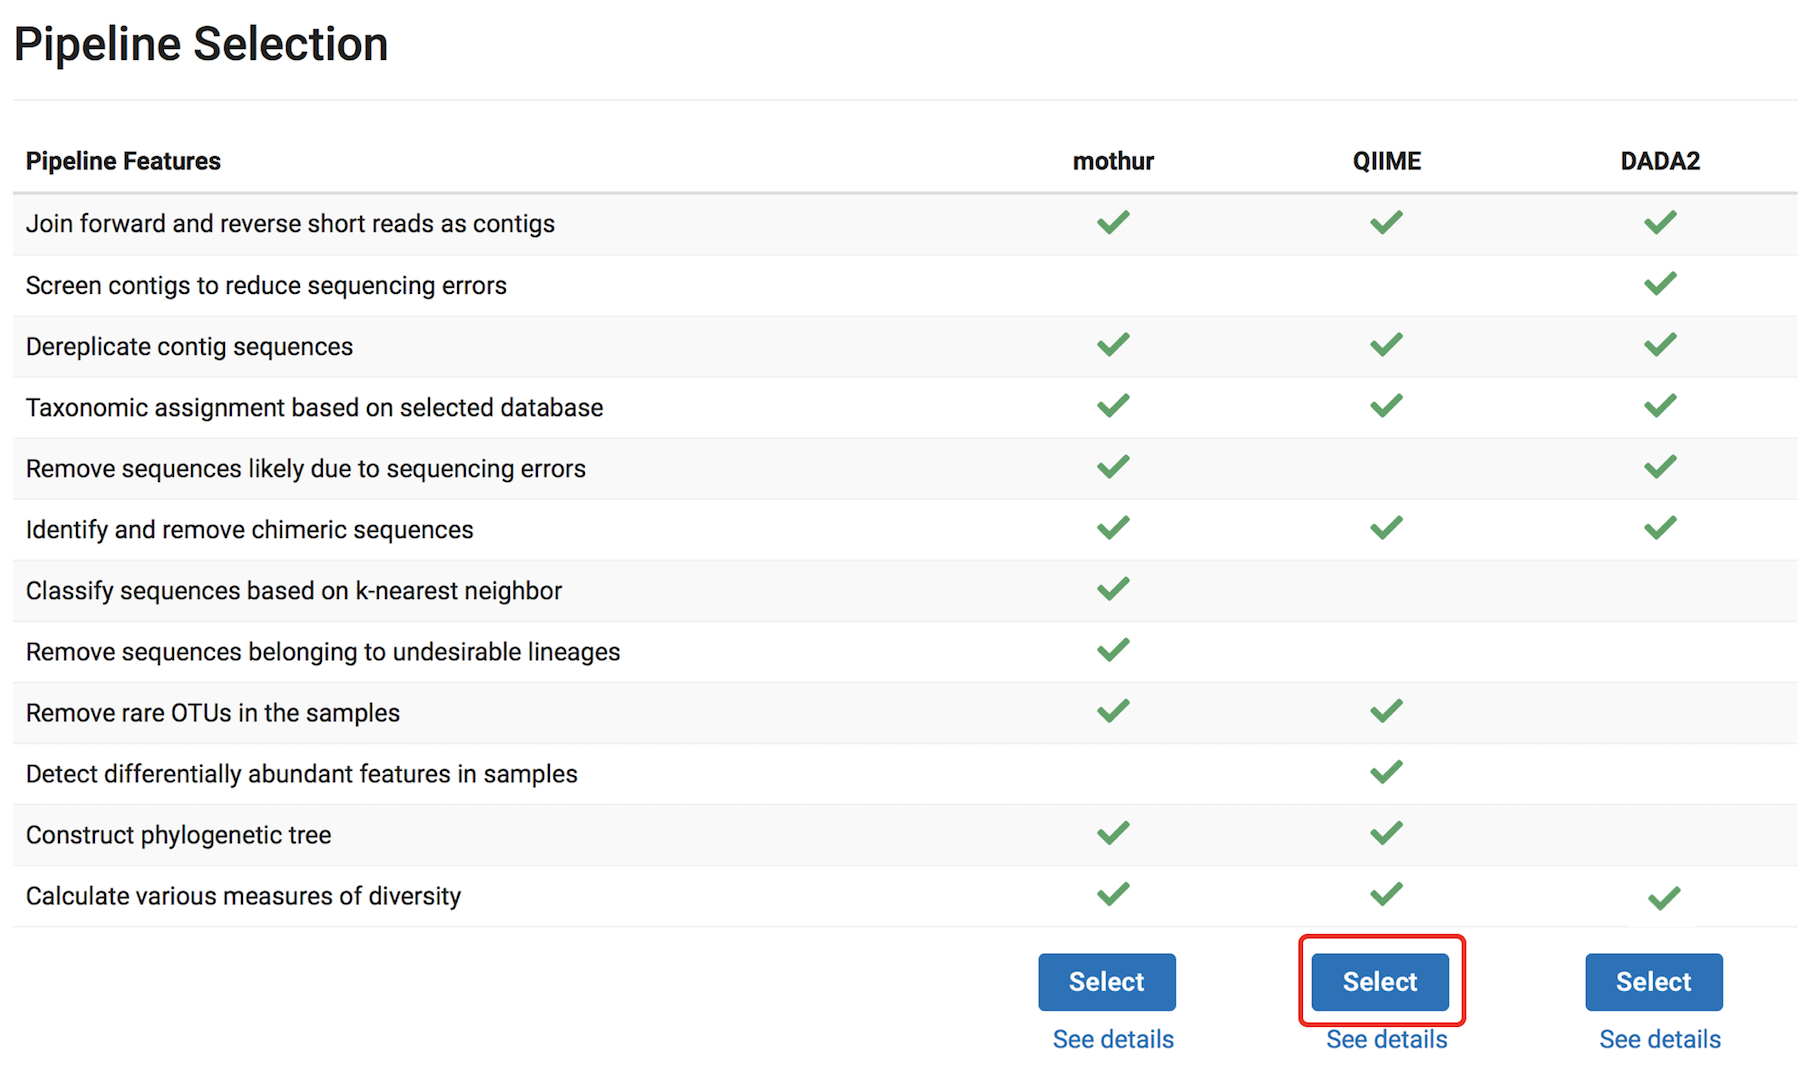 Screenshot of the pipeline selection page